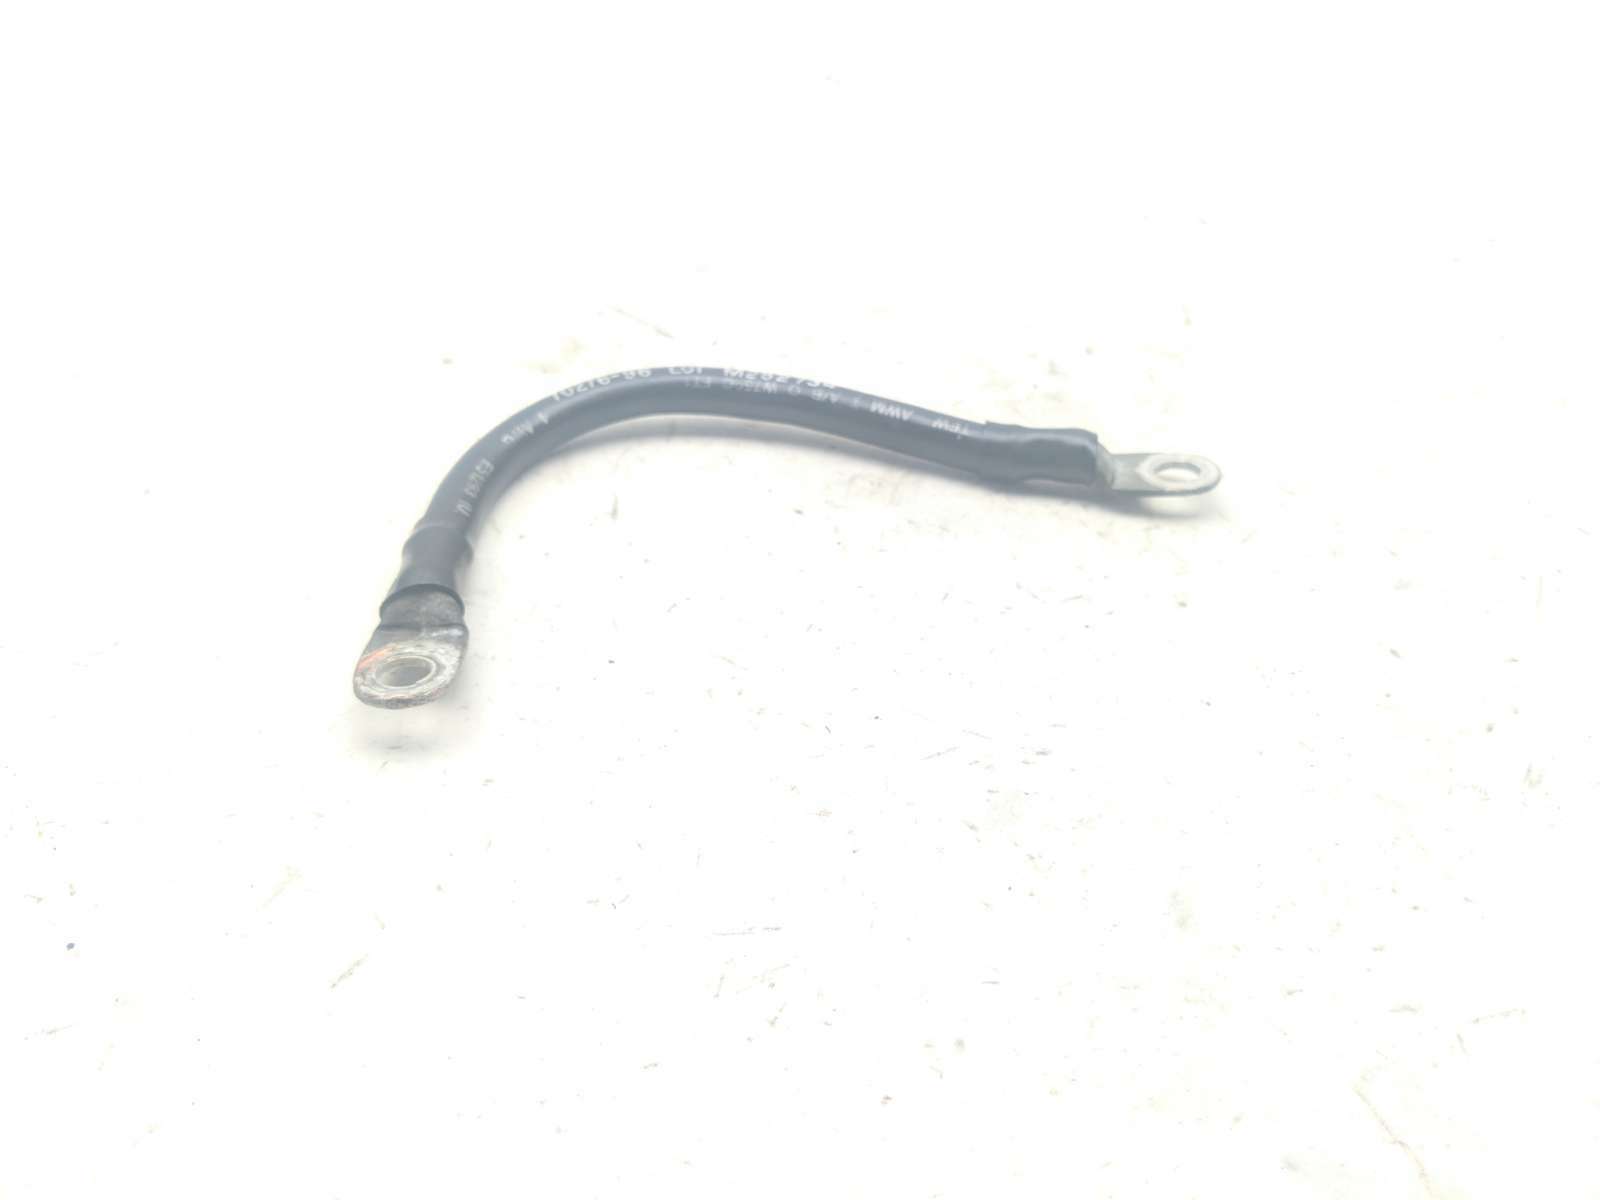 02 Harley Davidson FXDL Dyna Low Rider Battery Cable Terminal